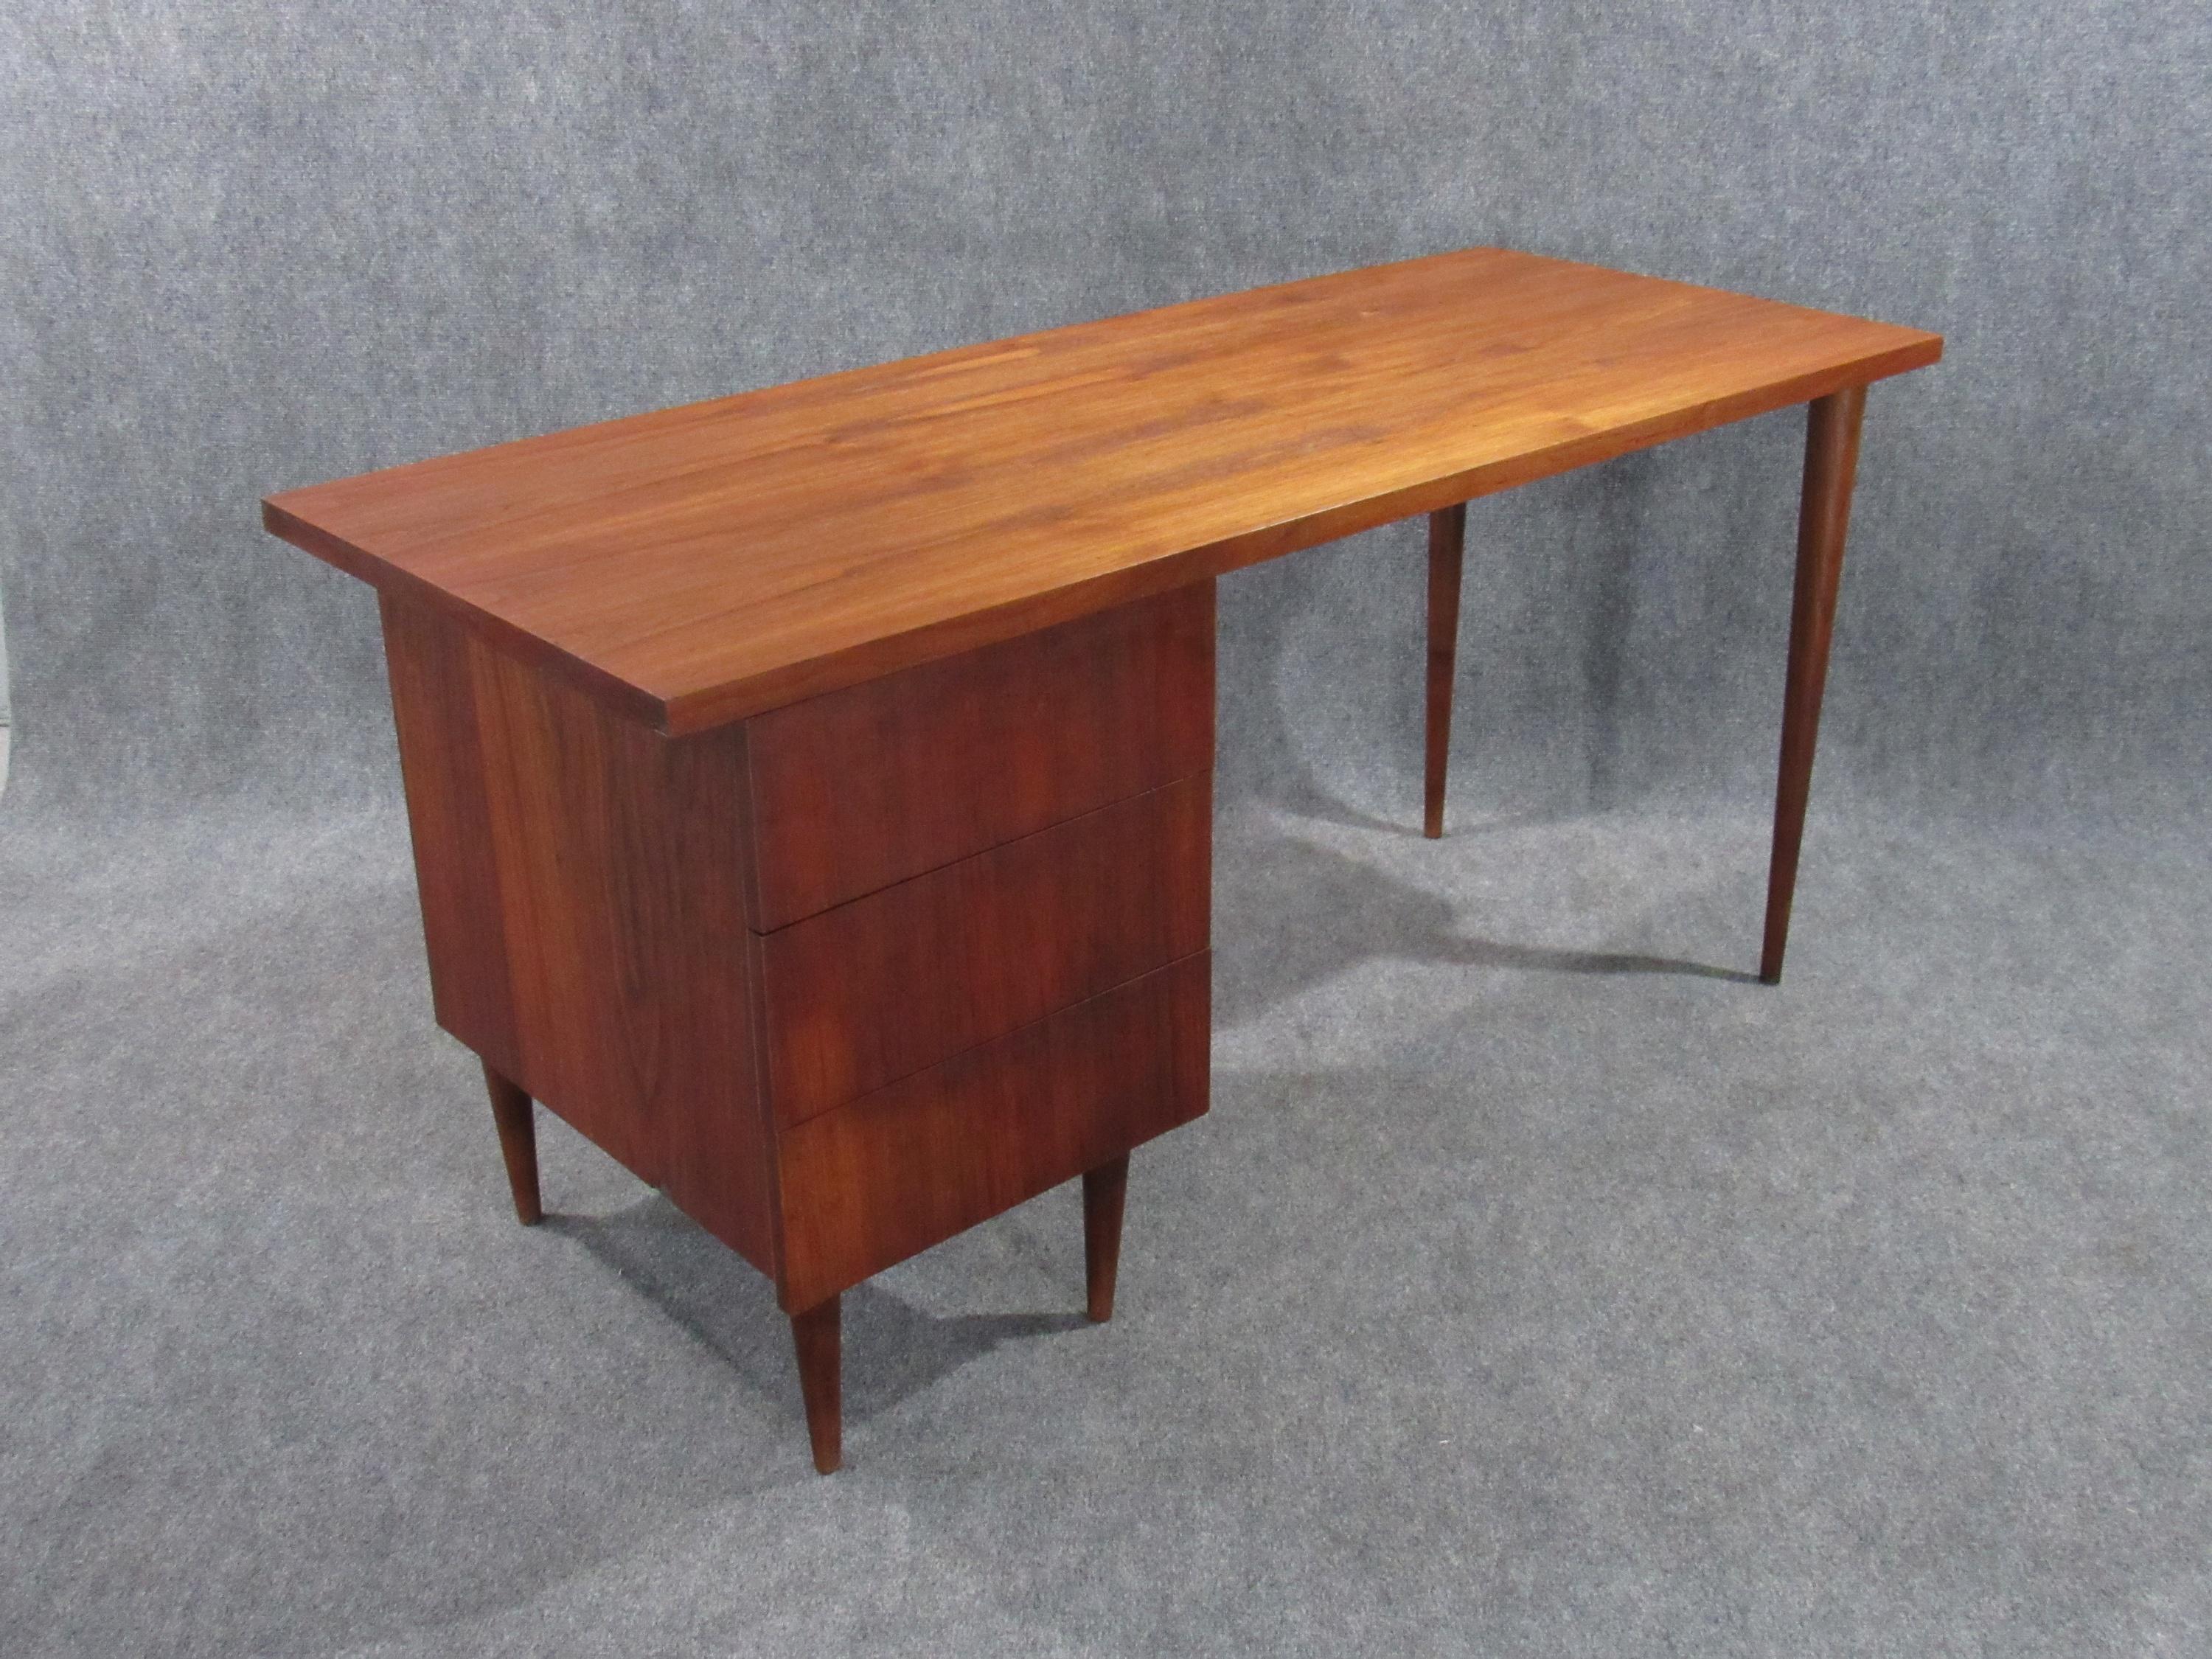 Late 20th Century Mid-Century Modern Walnut Small Desk by Ben Thompson for Design Research